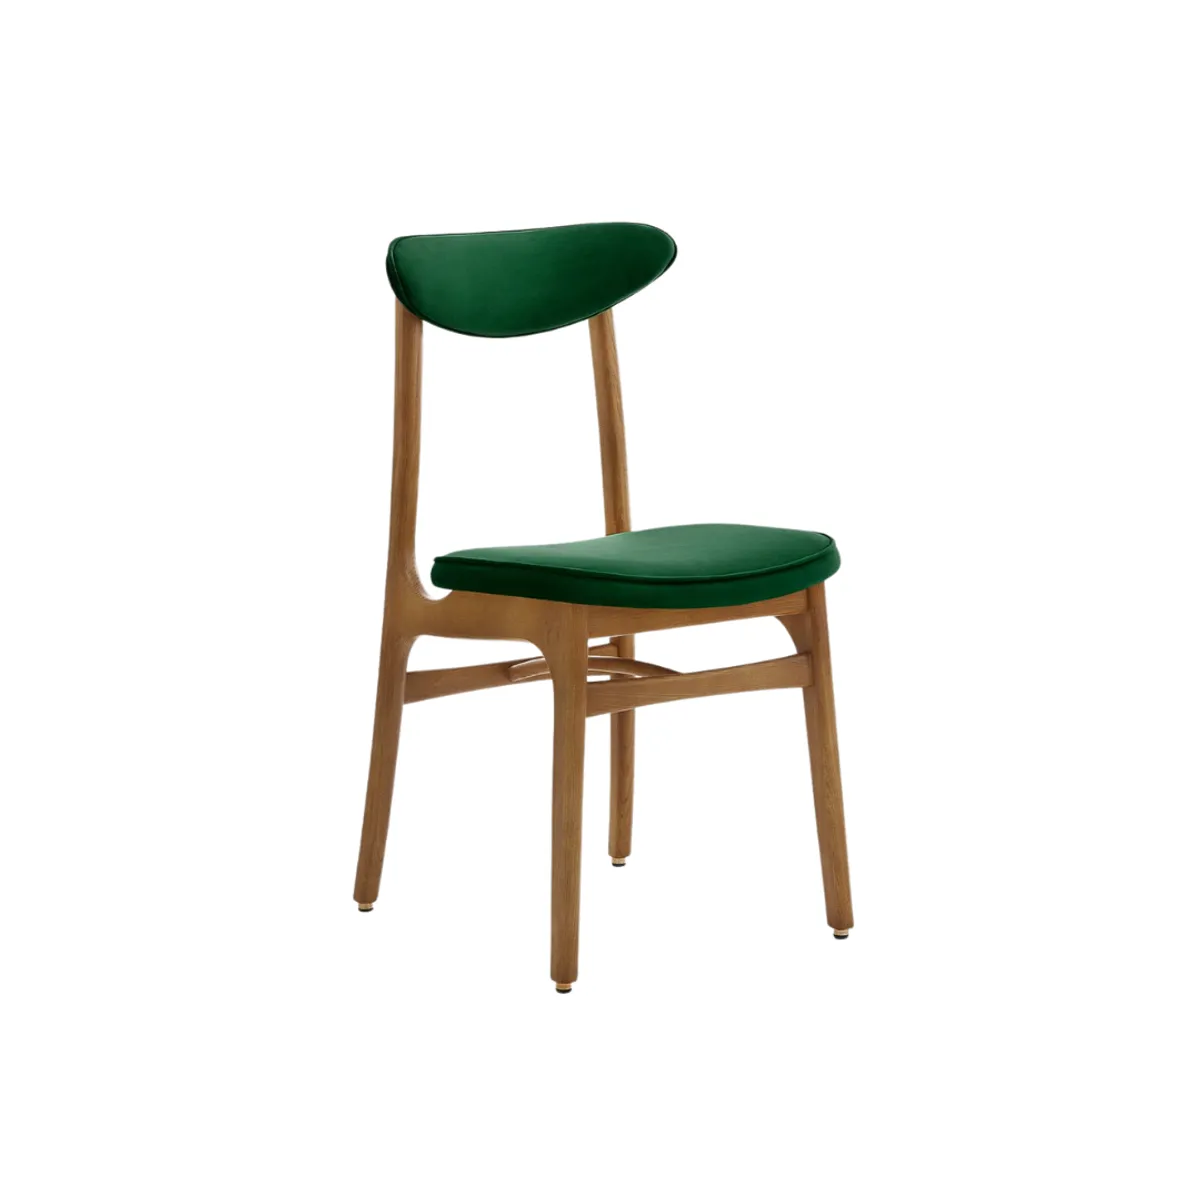 200-190 side chair 1